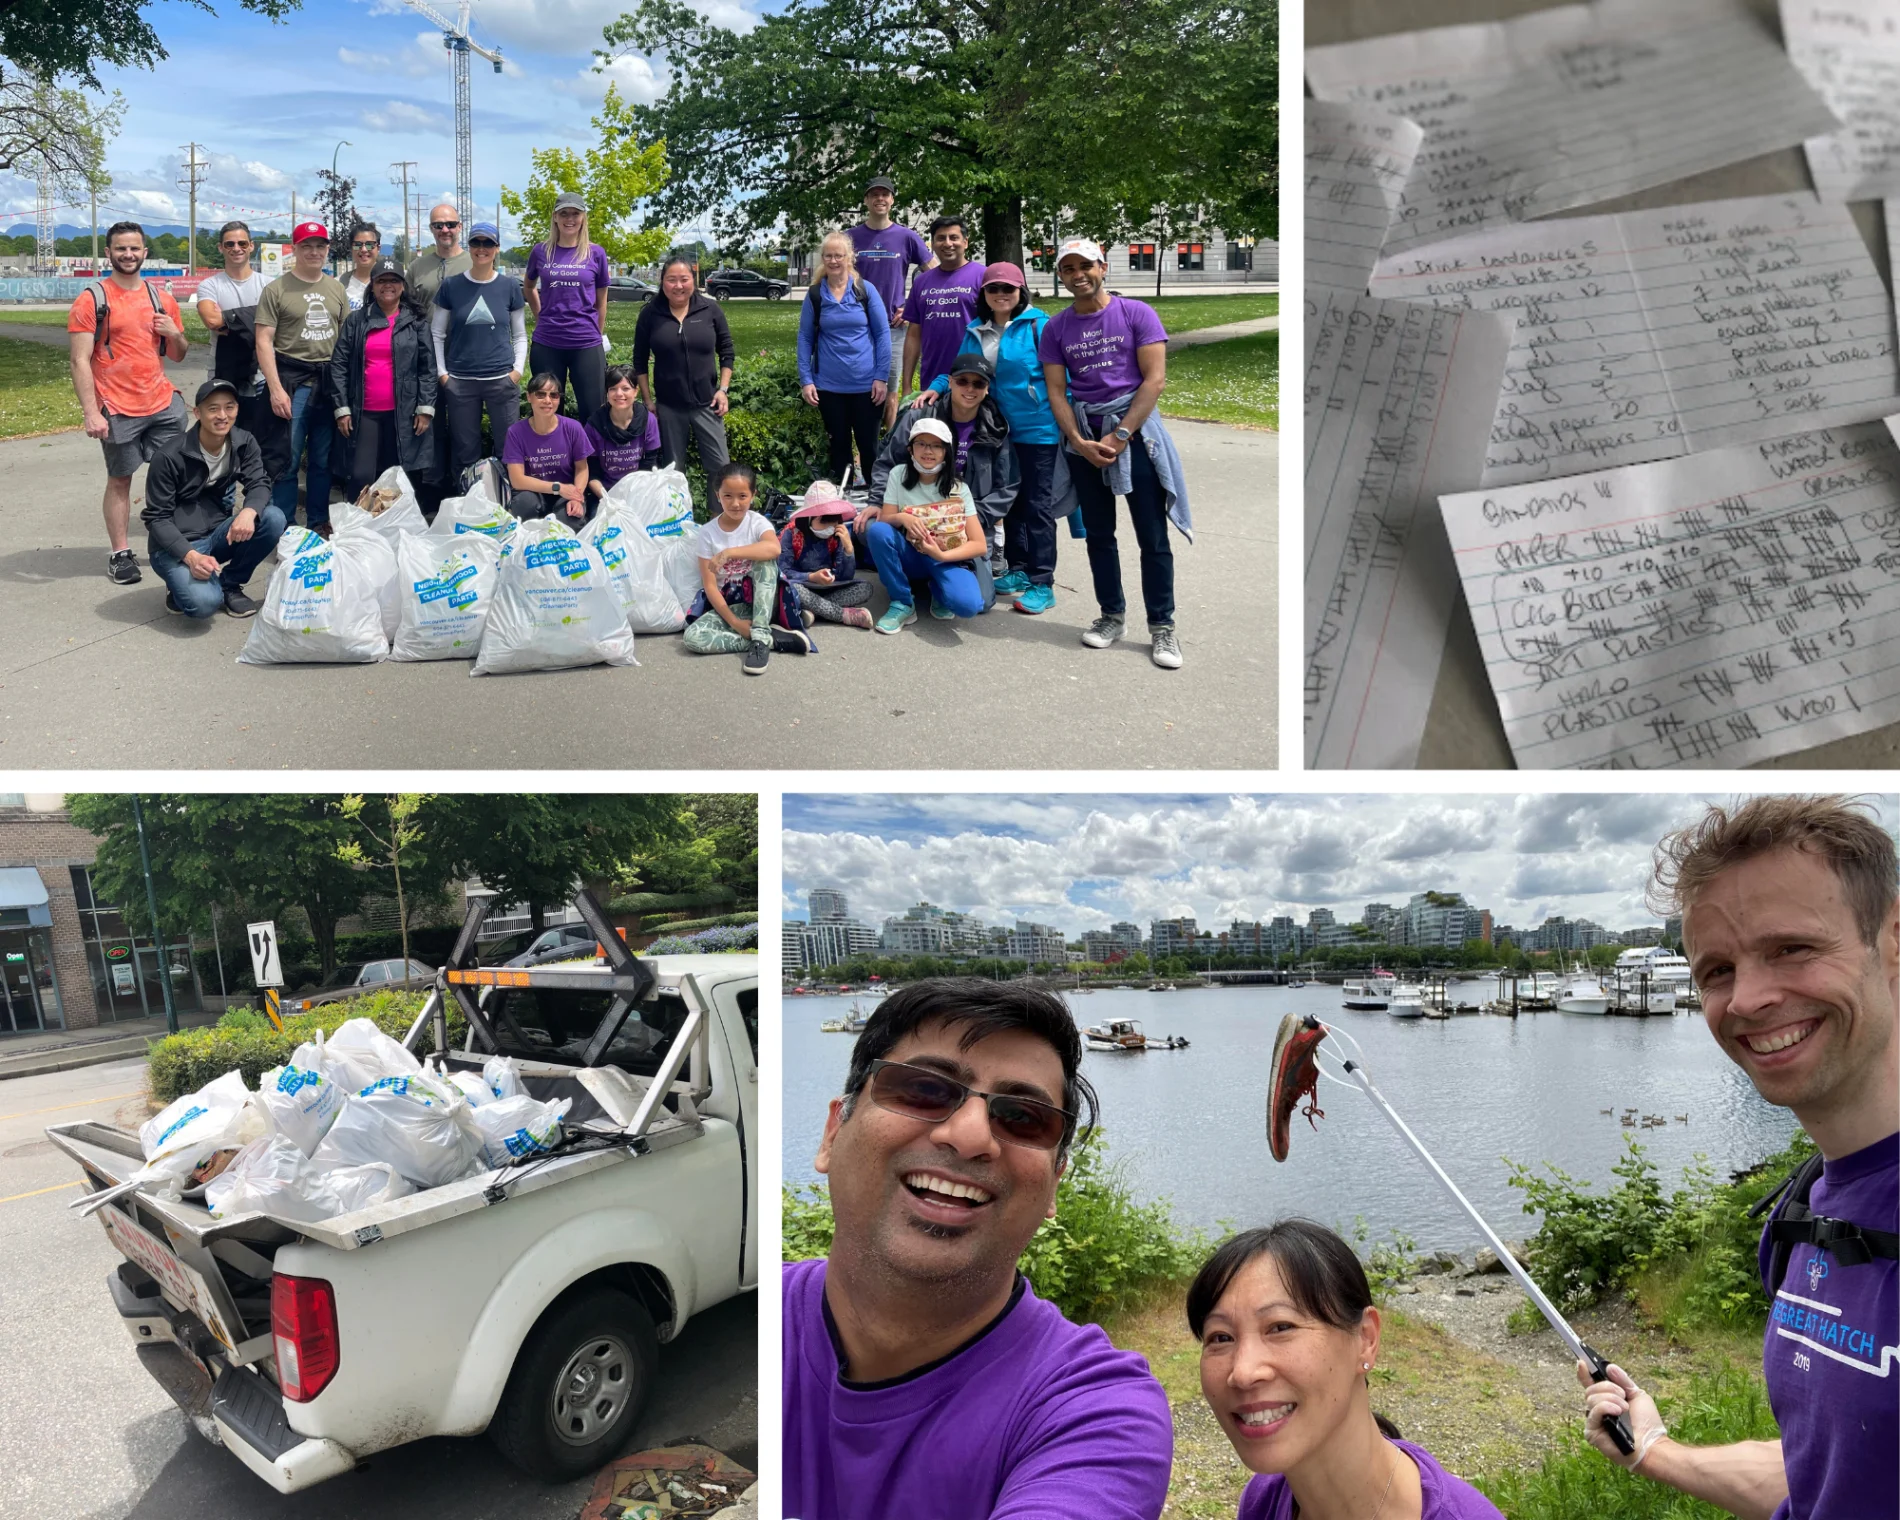 A collage of images depicting TELUS team members participating in shoreline cleanup activities across Canada.